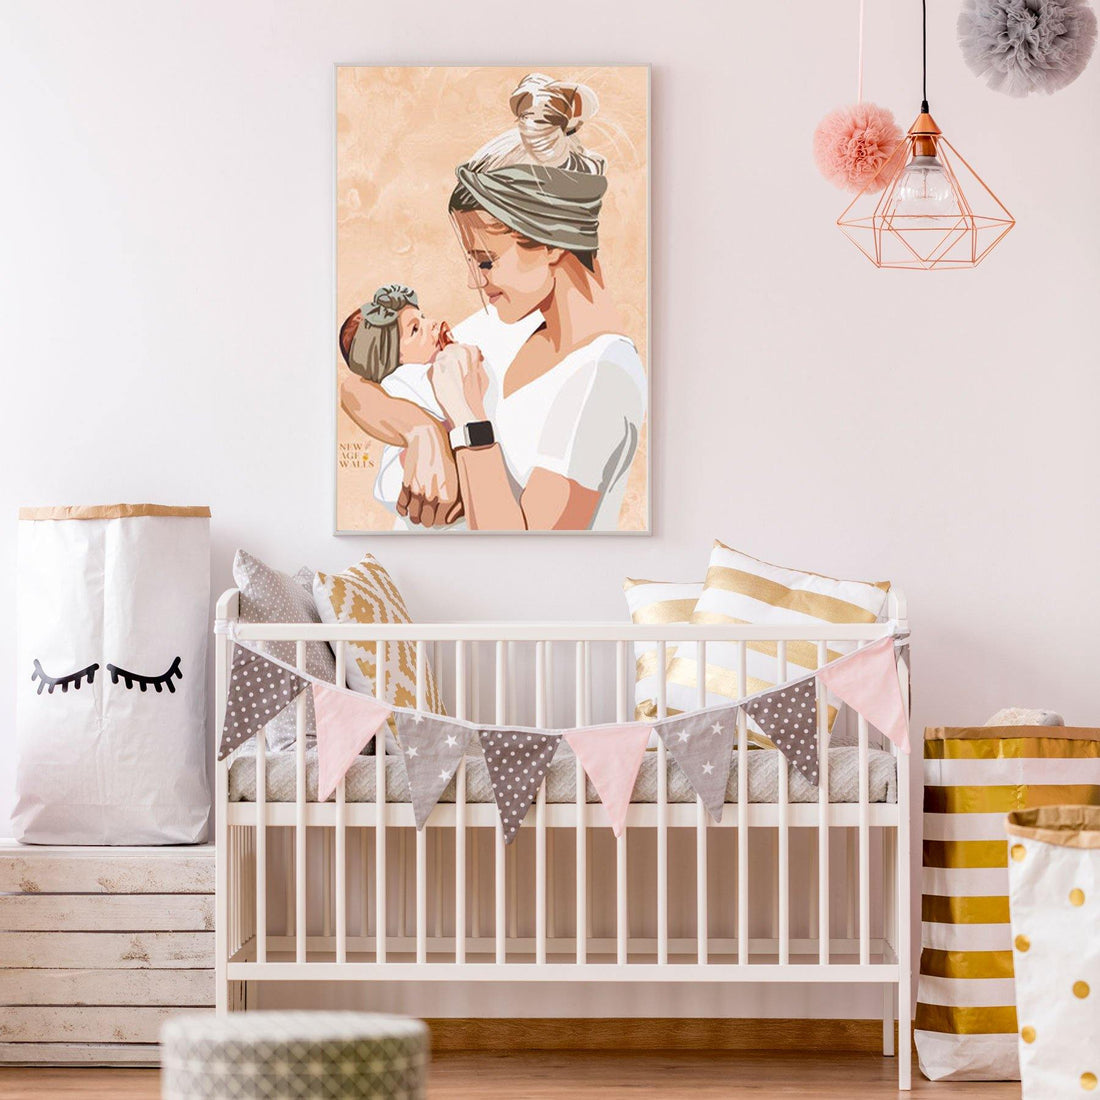 Baby Room Decor - How to Decorate a Nursery - New Age Walls